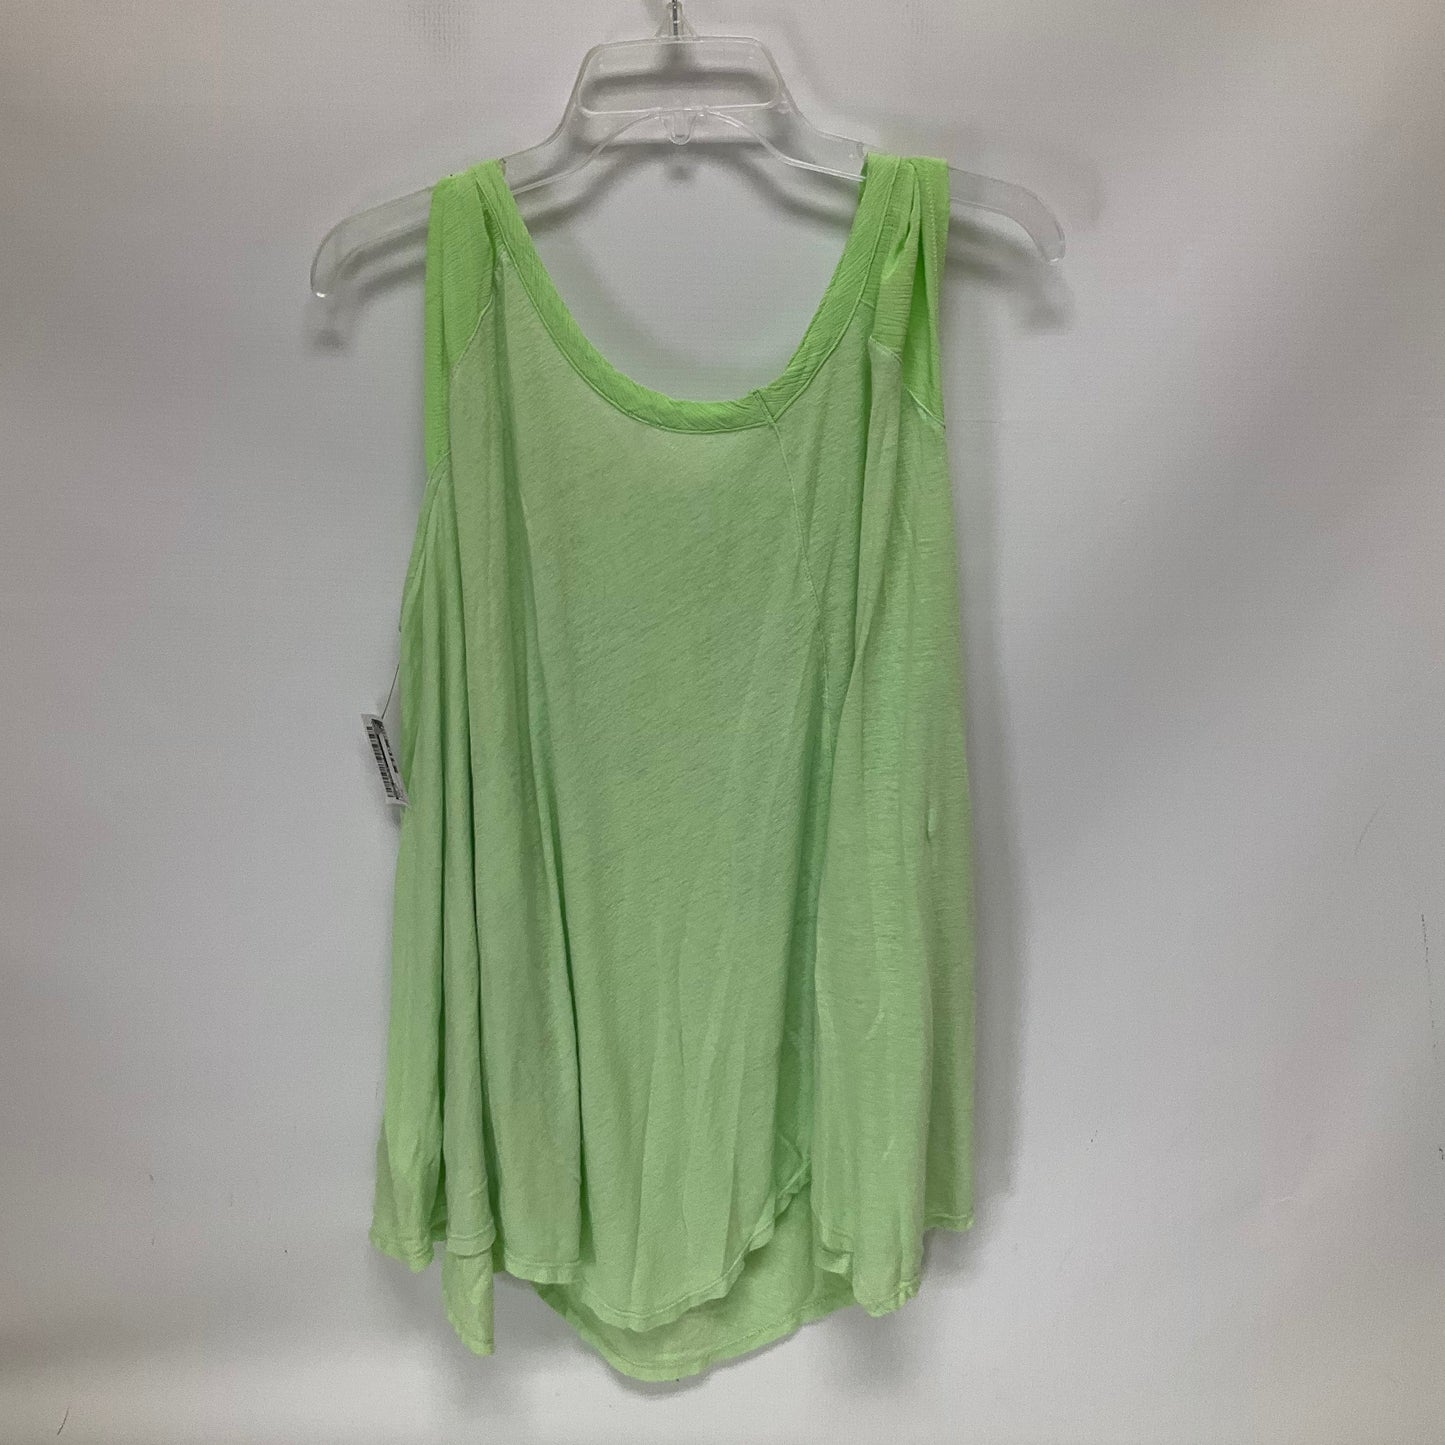 Green Top Short Sleeve Free People, Size M